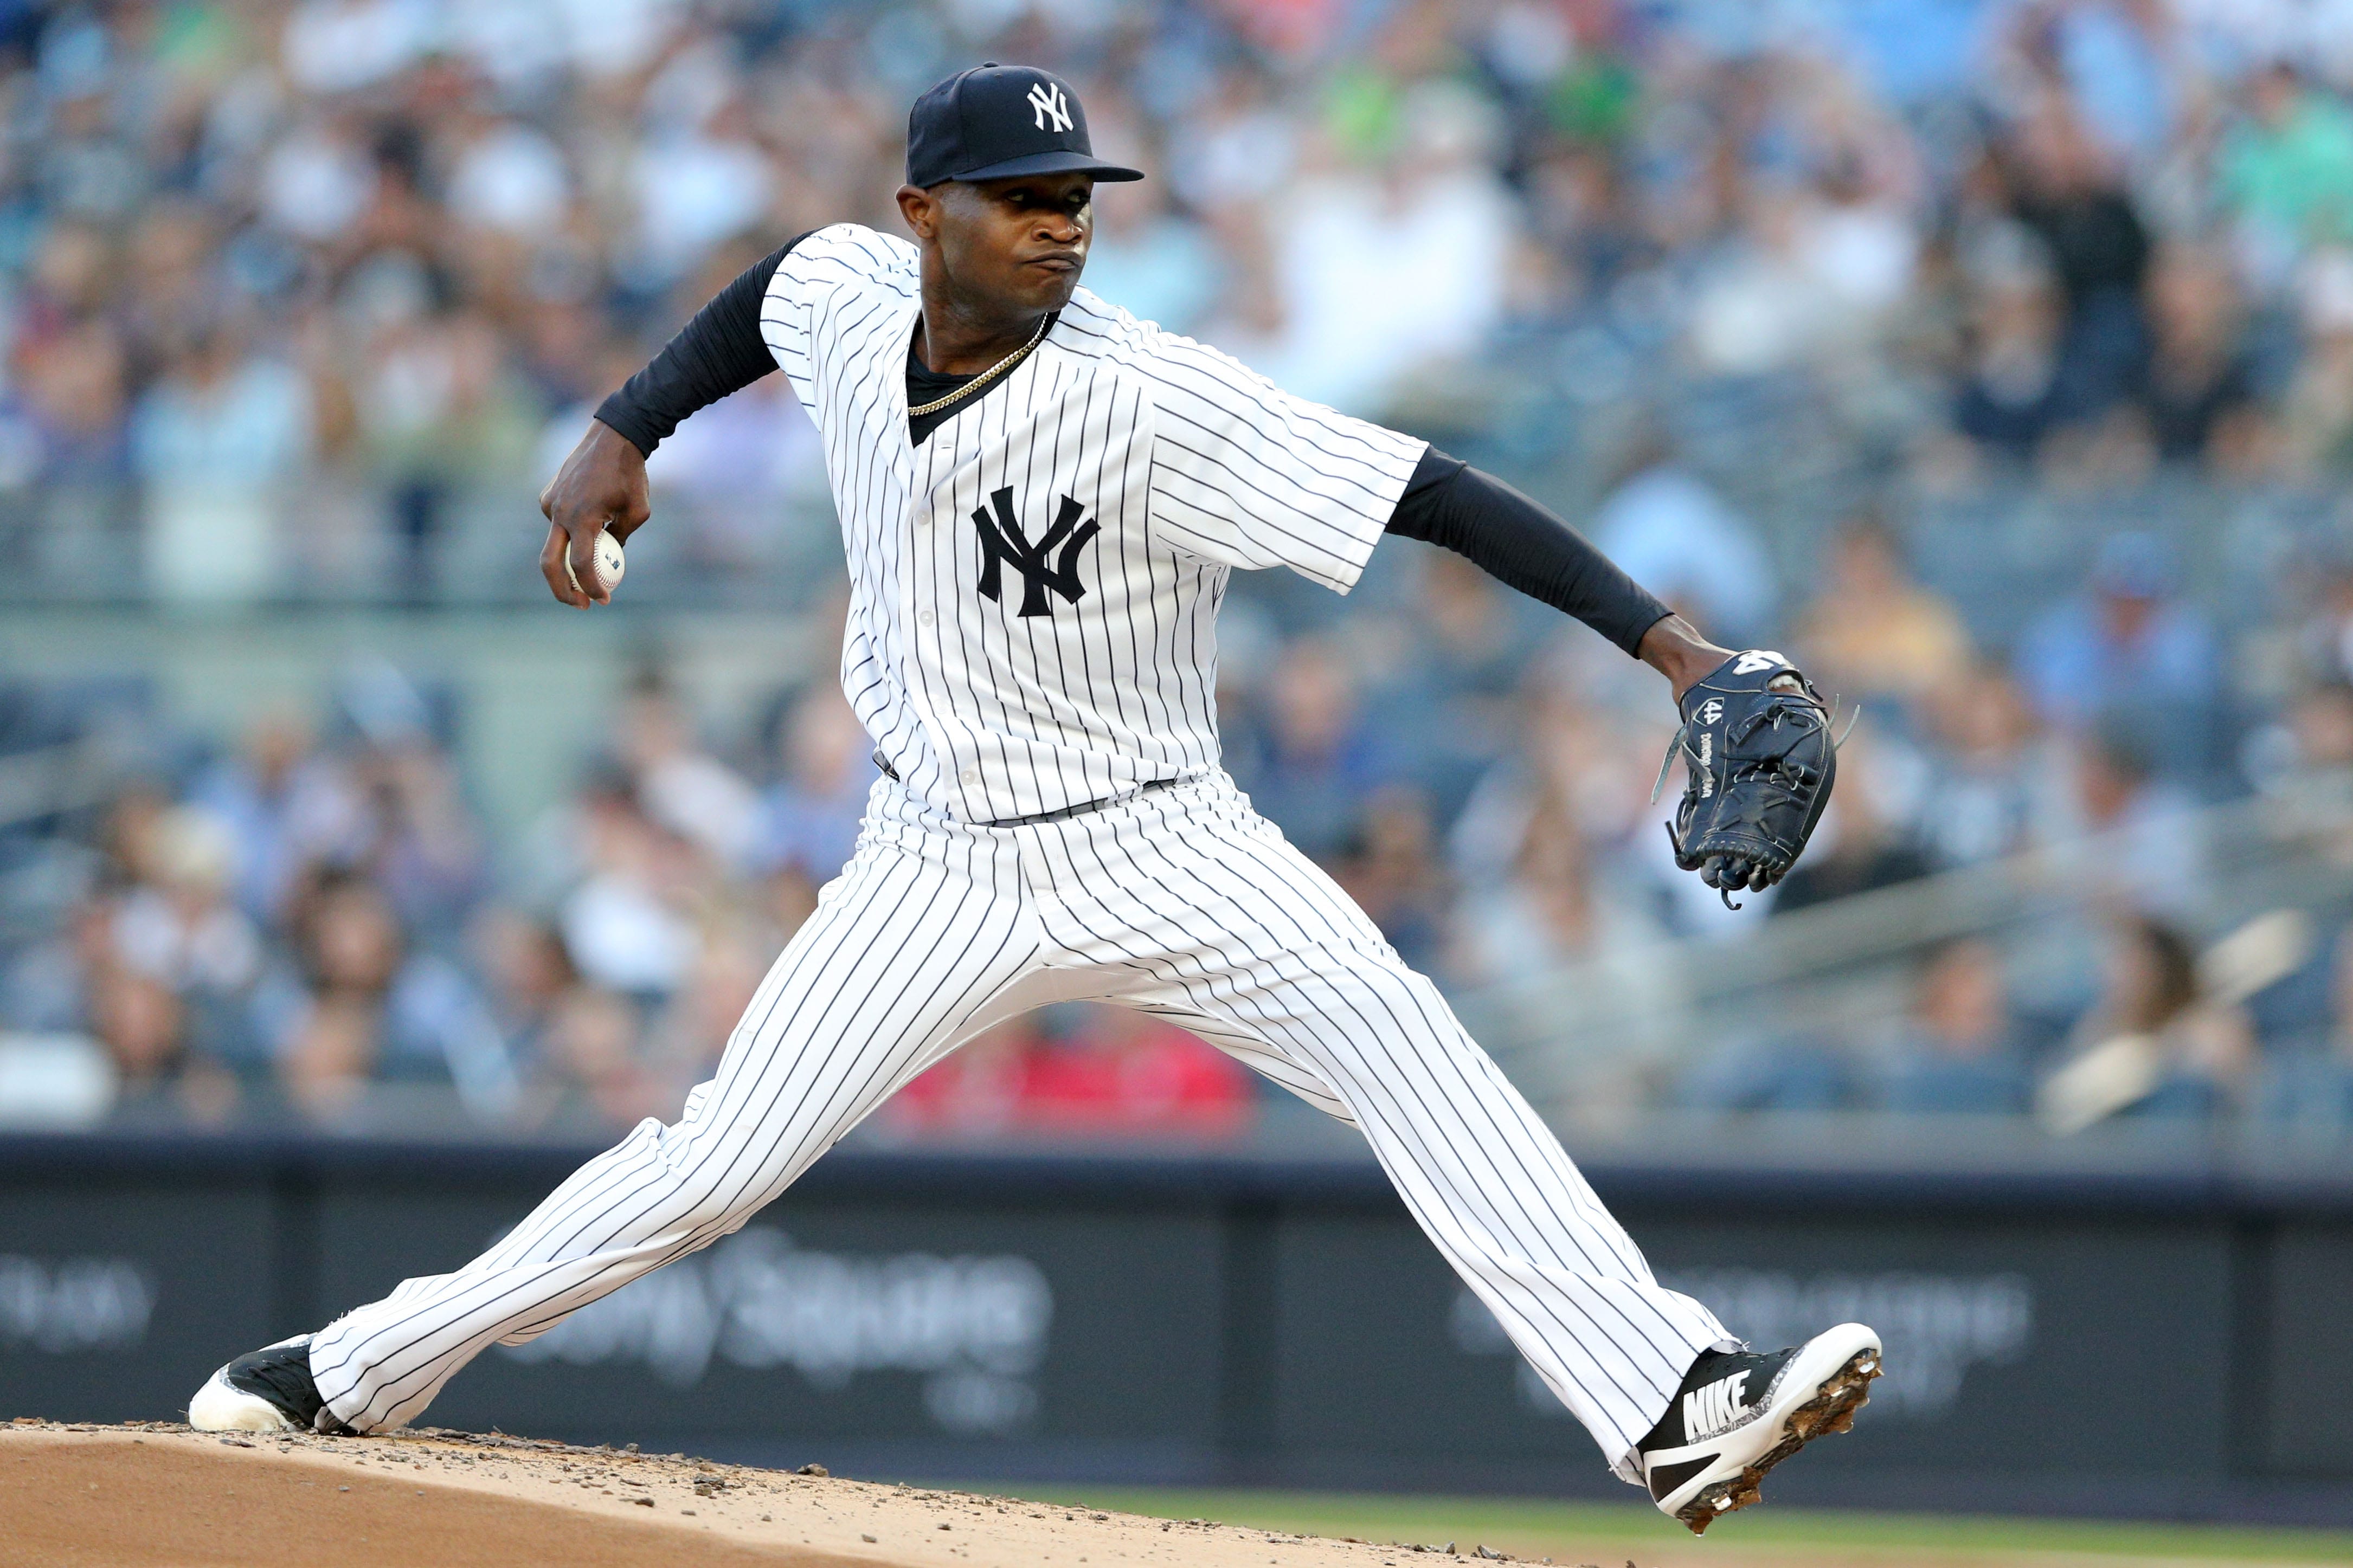 New York Yankees Player Profiles Domingo German, can he return to form